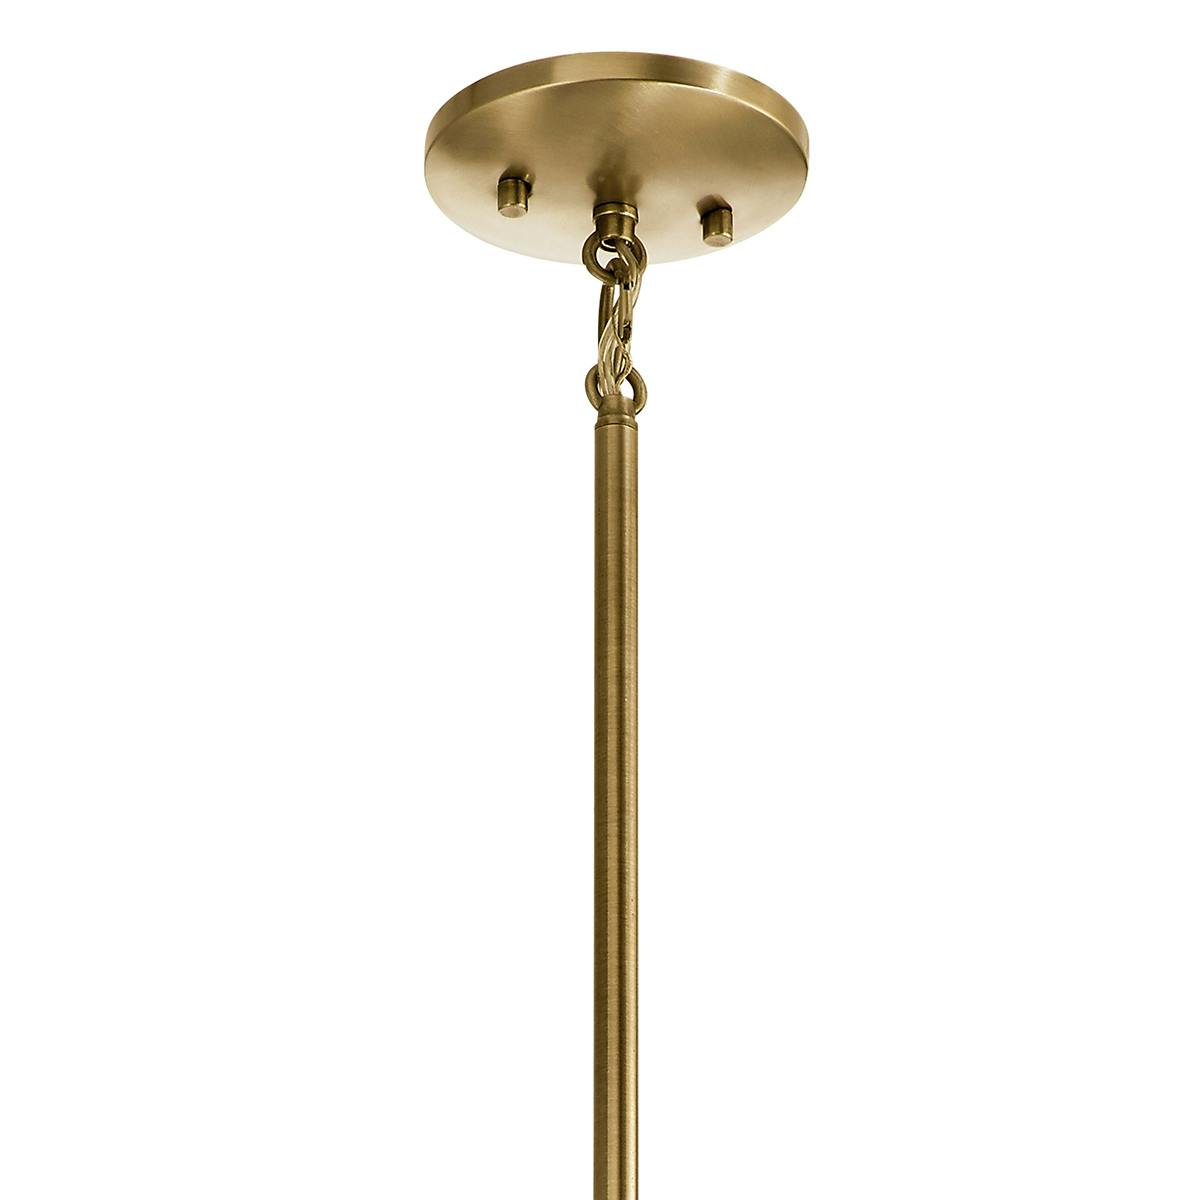 Canopy for the Thisbe 9 Light Chandelier Natural Brass on a white background